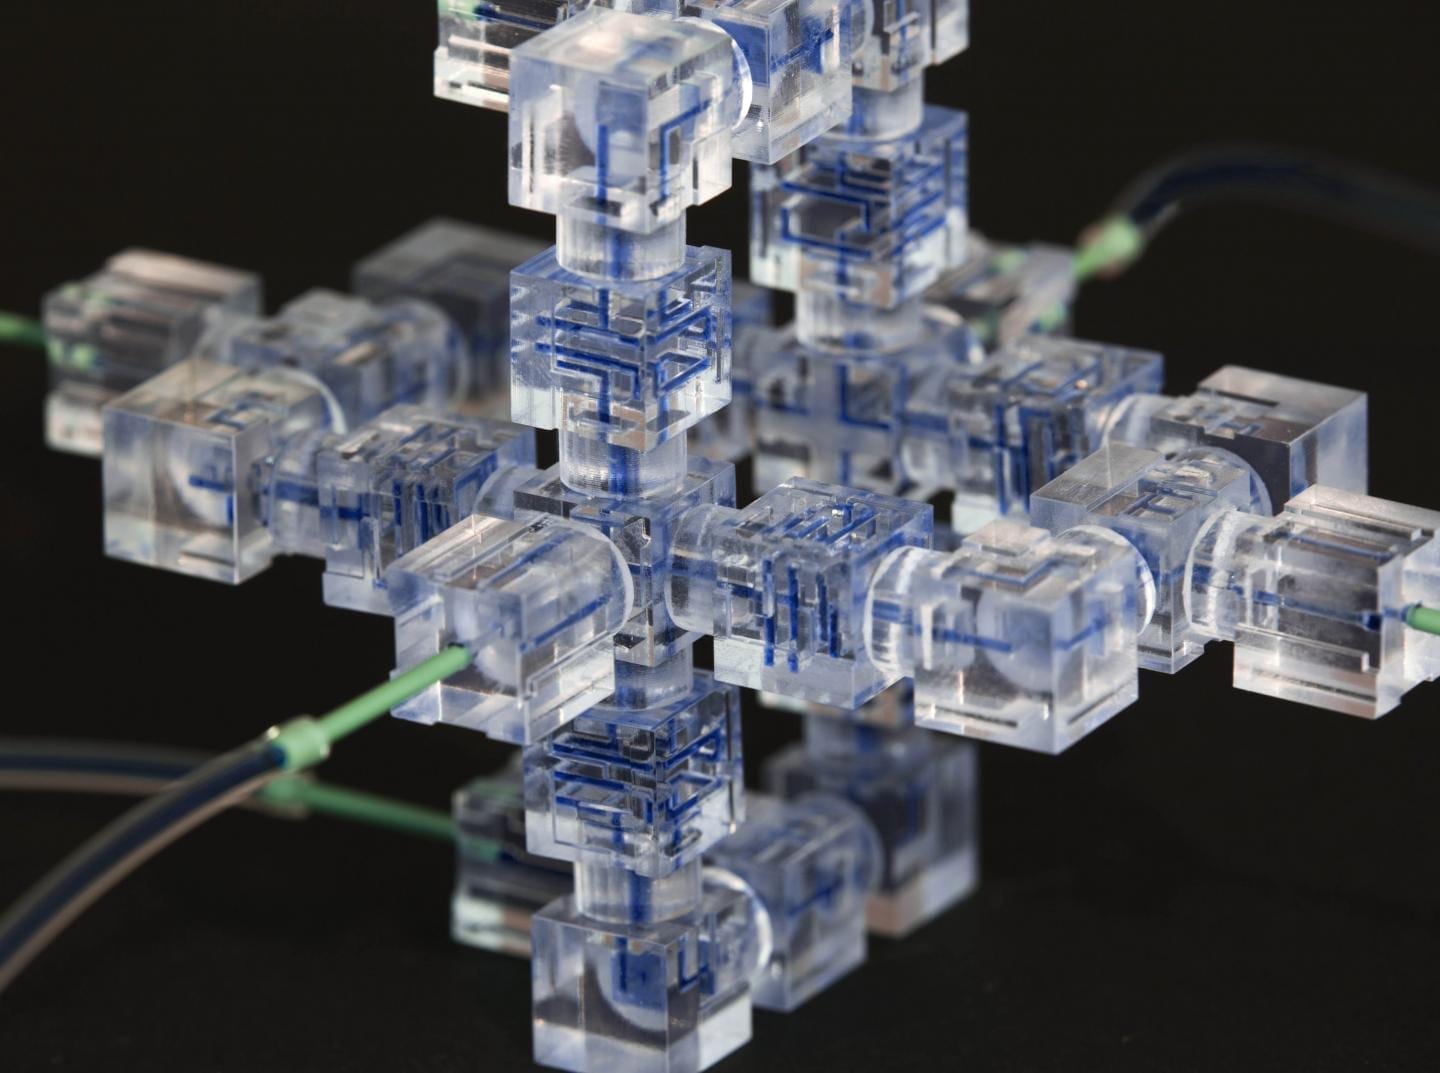 Lego-like modular components make building 3-D 'labs-on-a-chip' a snap